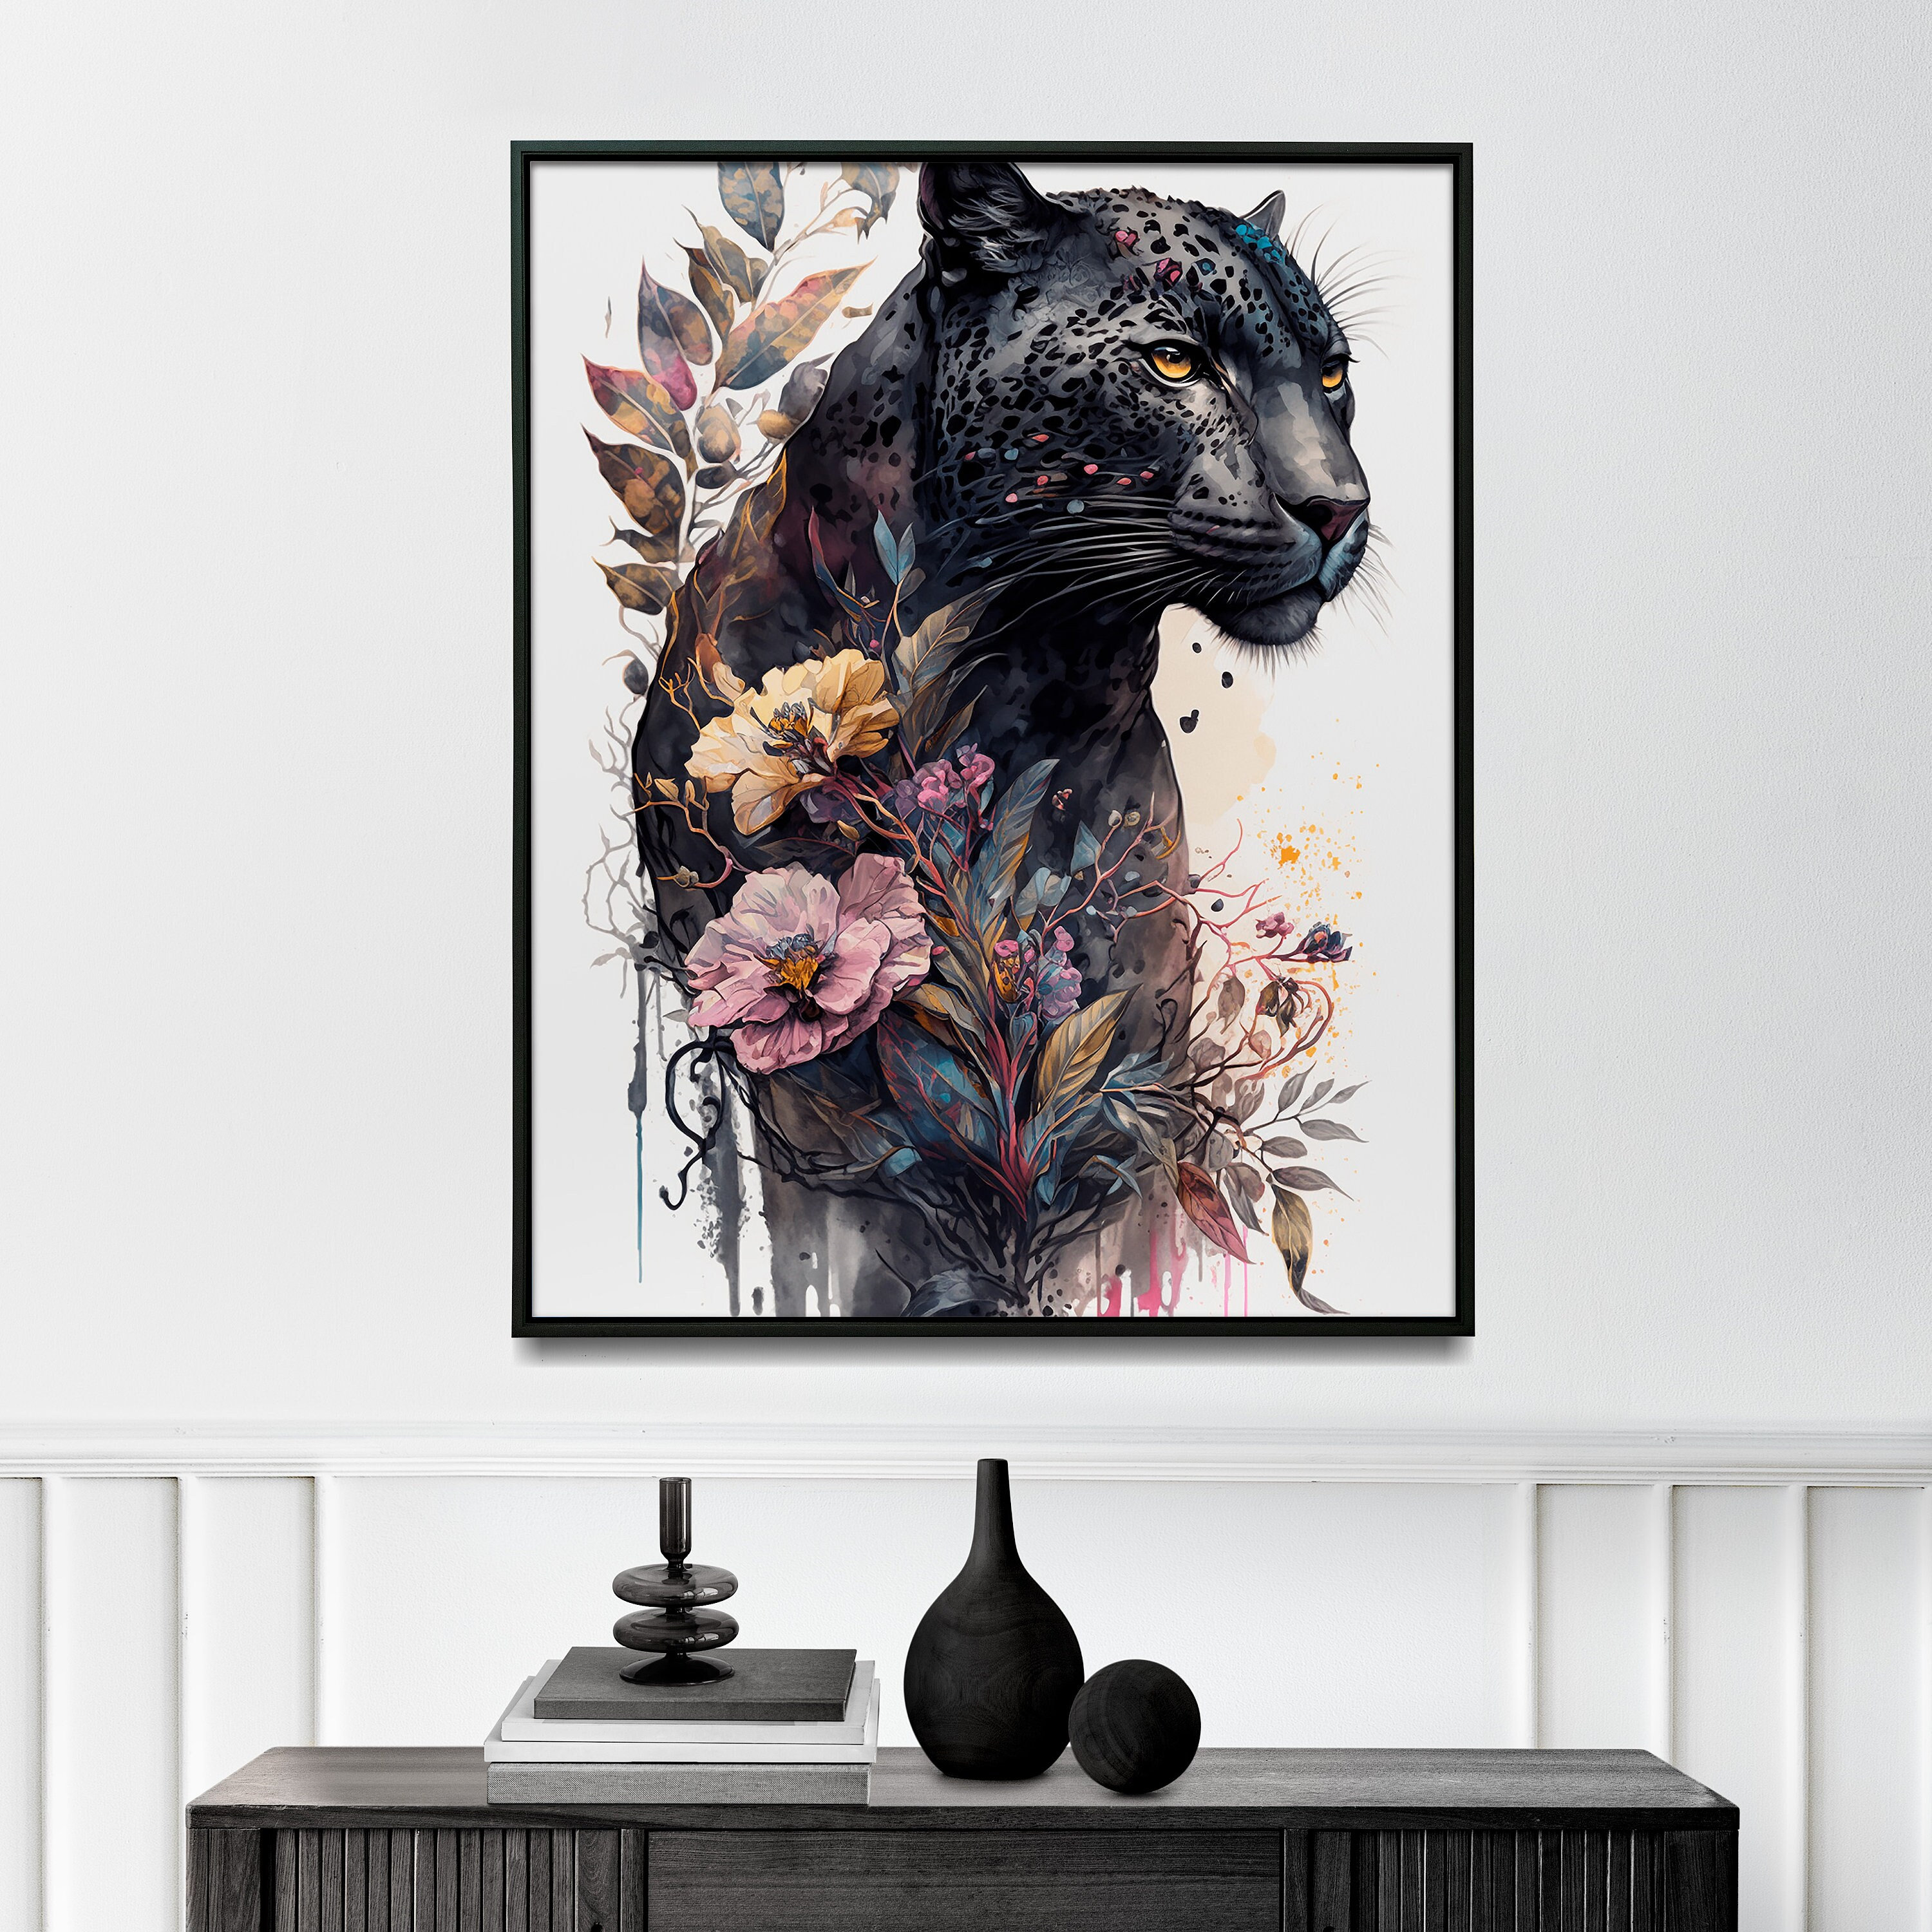 Black Panther For sale as Framed Prints, Photos, Wall Art and